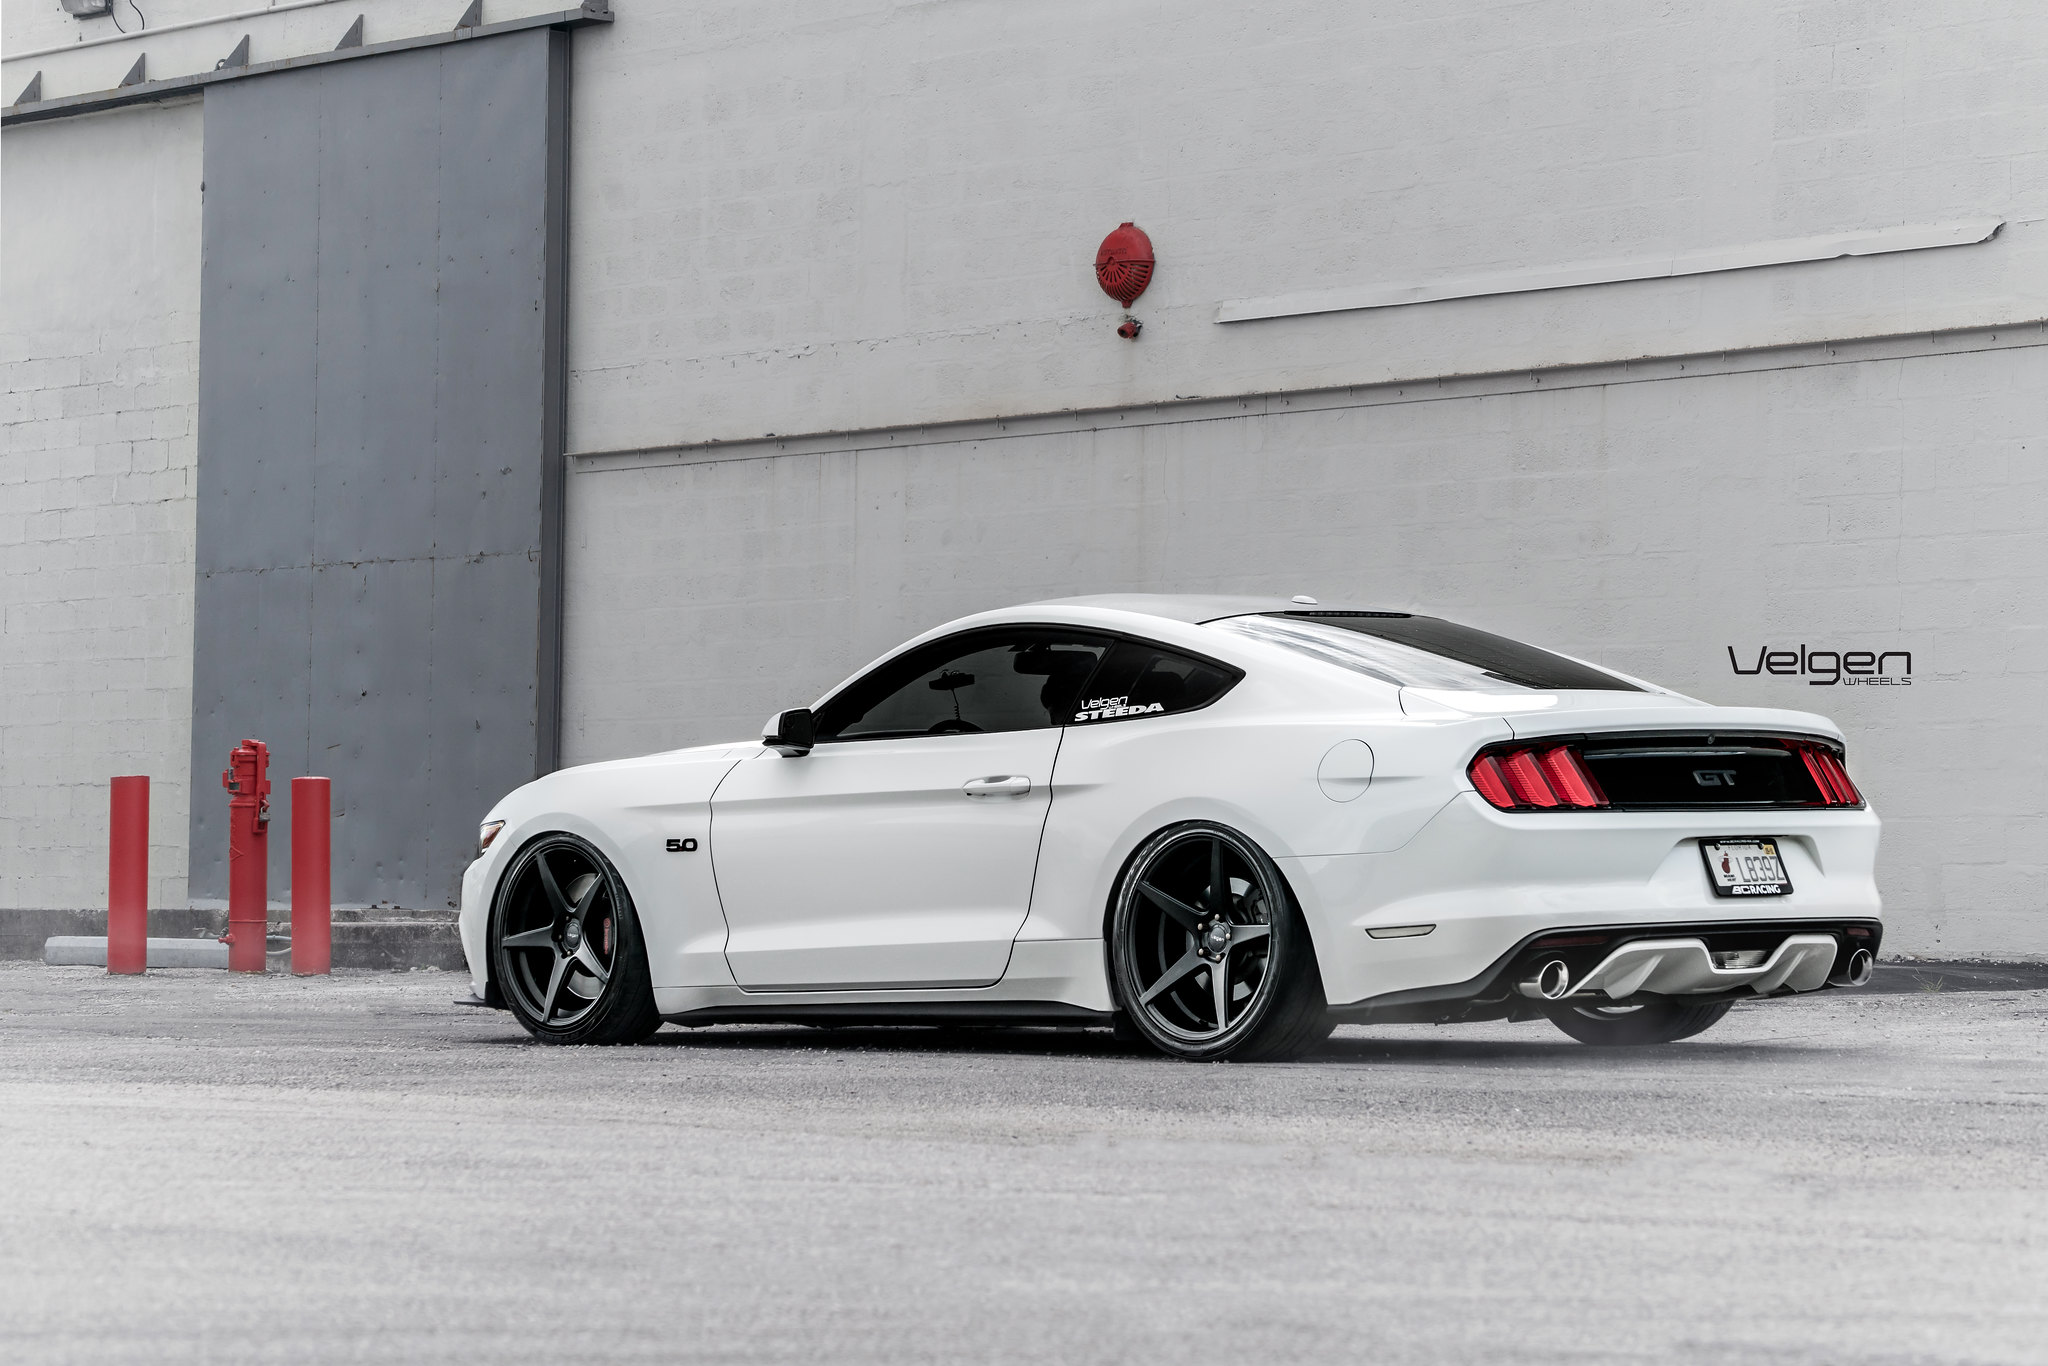 S650 Mustang 19" 20" Velgen Flow Forged Concave Wheels Mustang S650 - Vibe Motorsports Official Thread 33052073350_f9a4711658_k